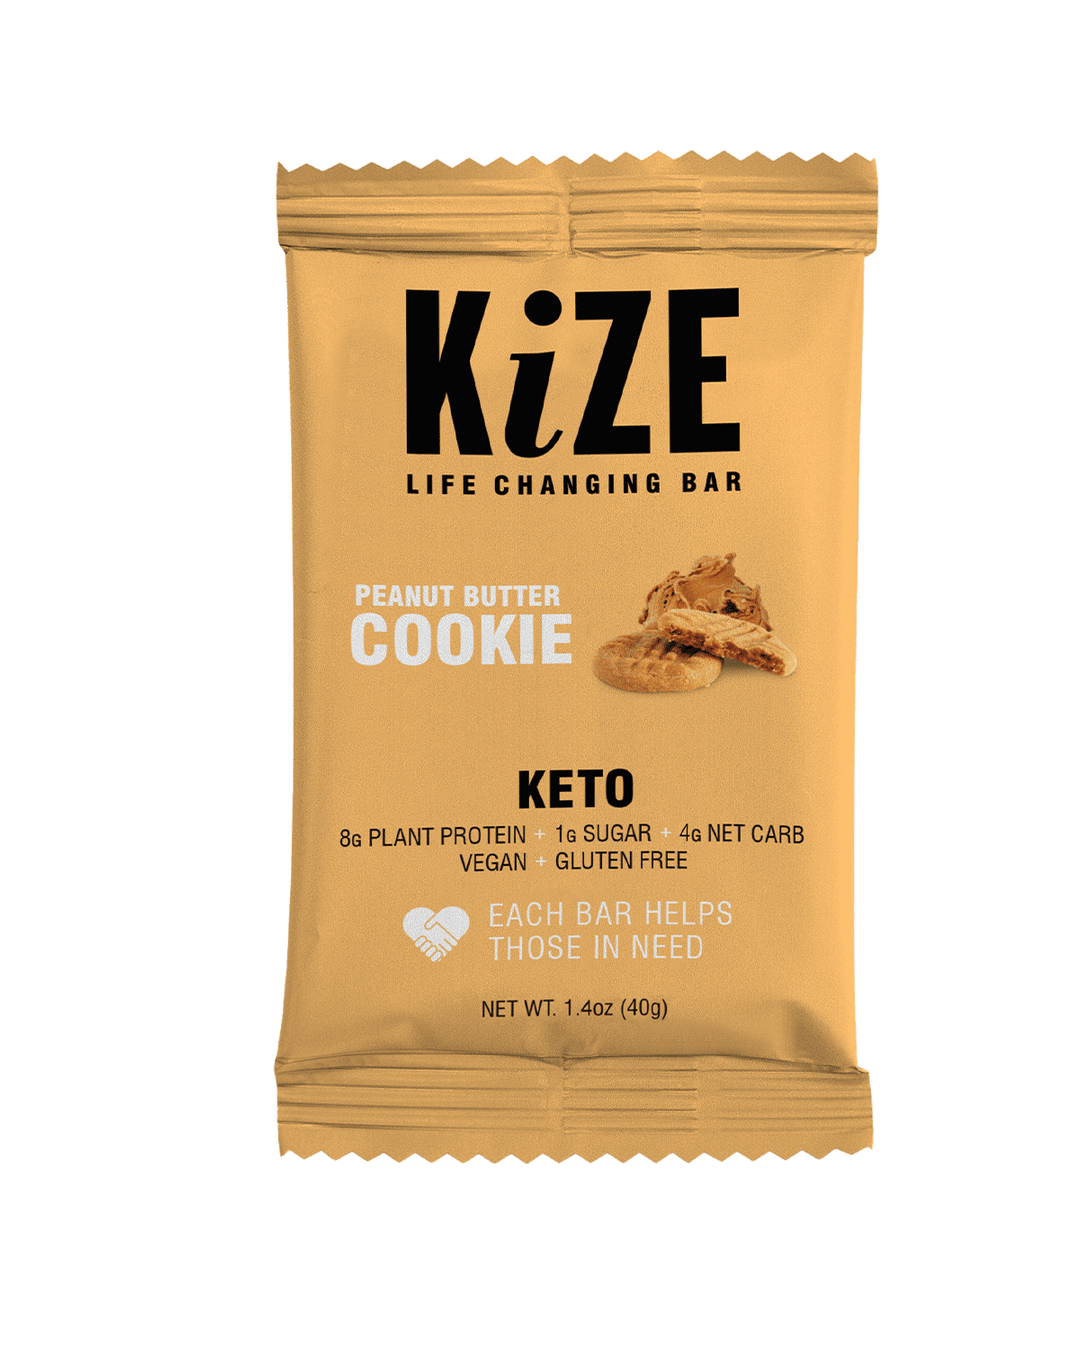 Kize Life Changing Bar Peanut Butter Cookie Keto Protein Vegan Gluten Free Package